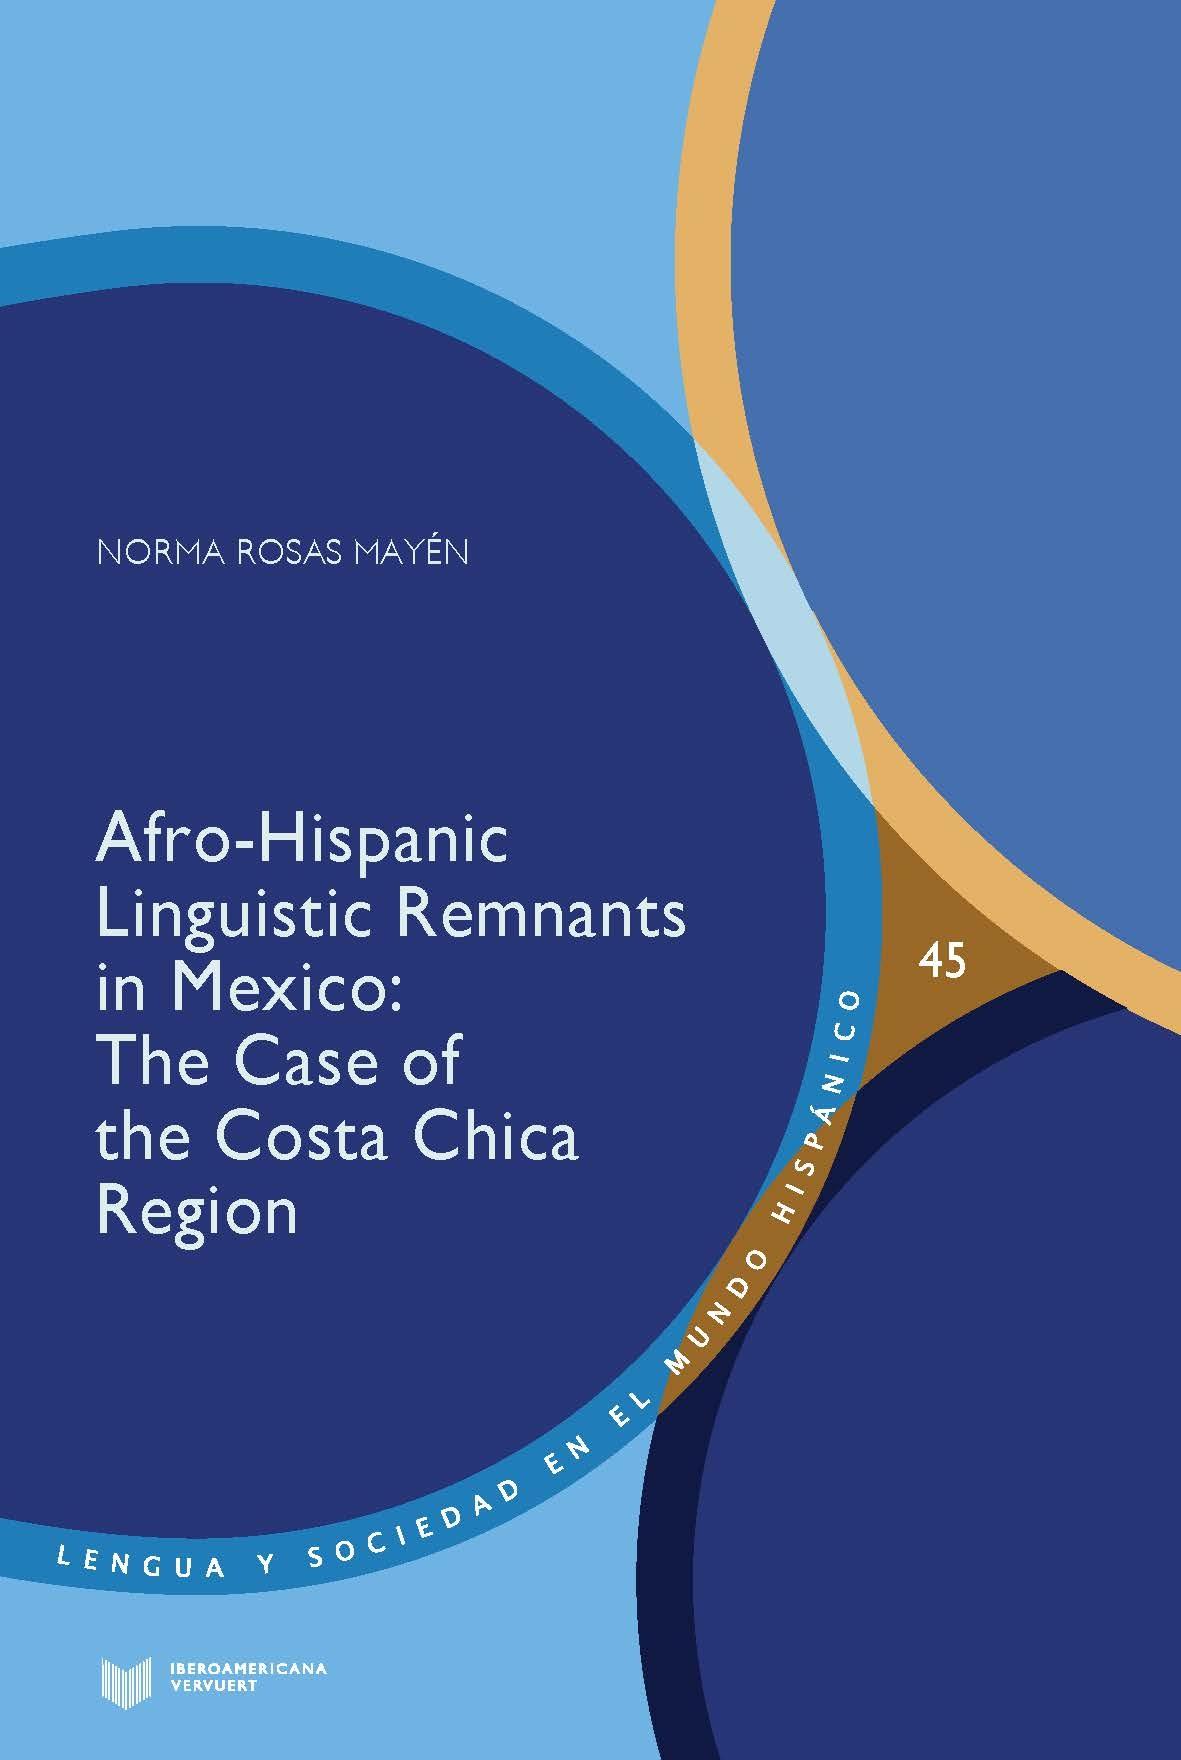 AFRO-HISPANIC LINGUISTIC REMNANTS IN MEXICO "The Case of the Costa Chica Region"